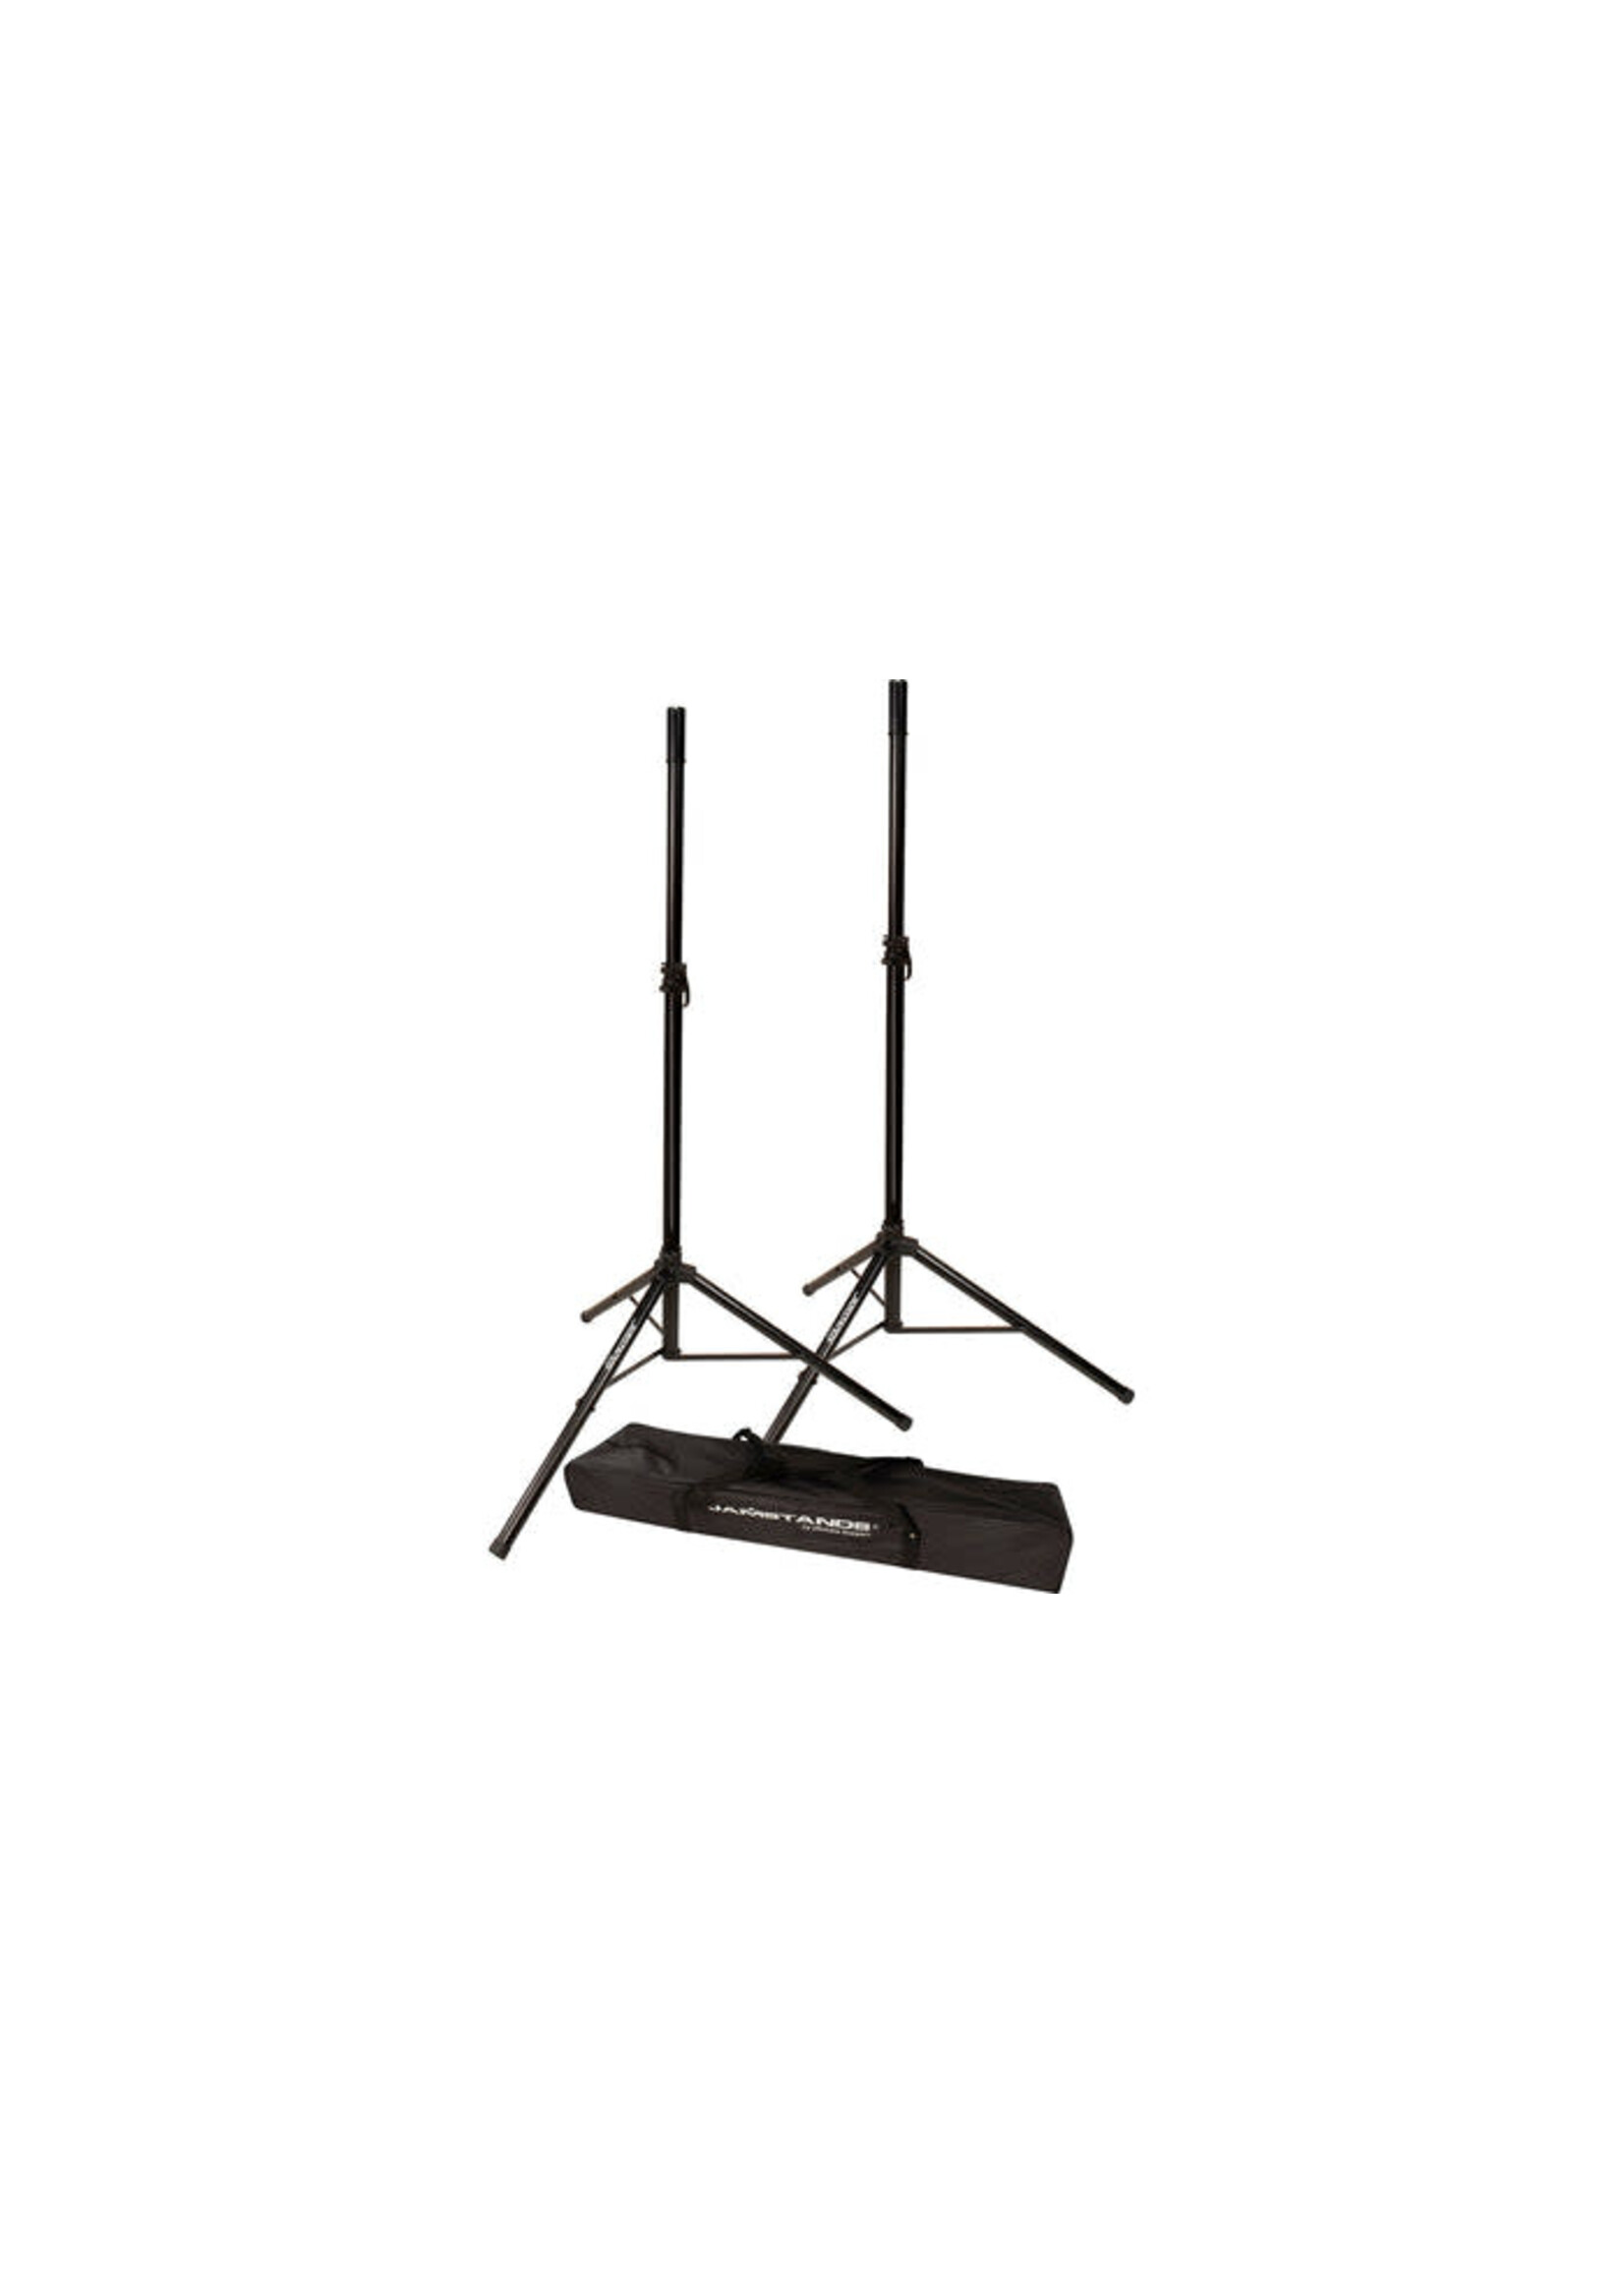 JamStands JamStands JS-TS50-2 Speaker Stands Pair with Bag